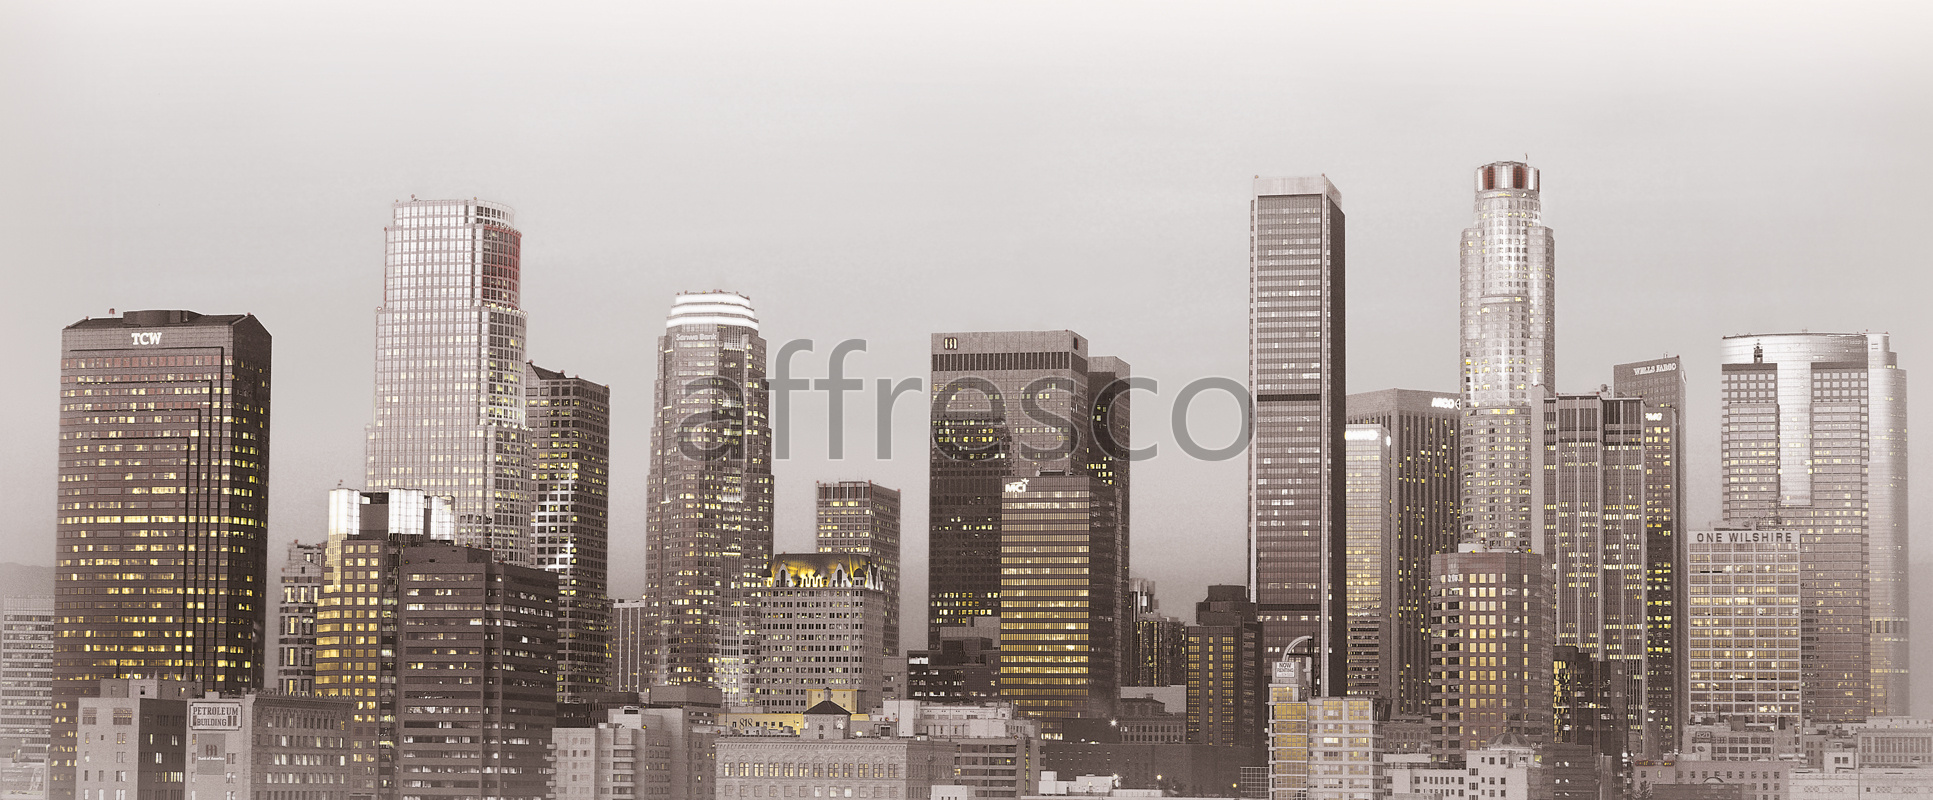 7099 | Pictures of Cities  | Morning skyscrapers | Affresco Factory